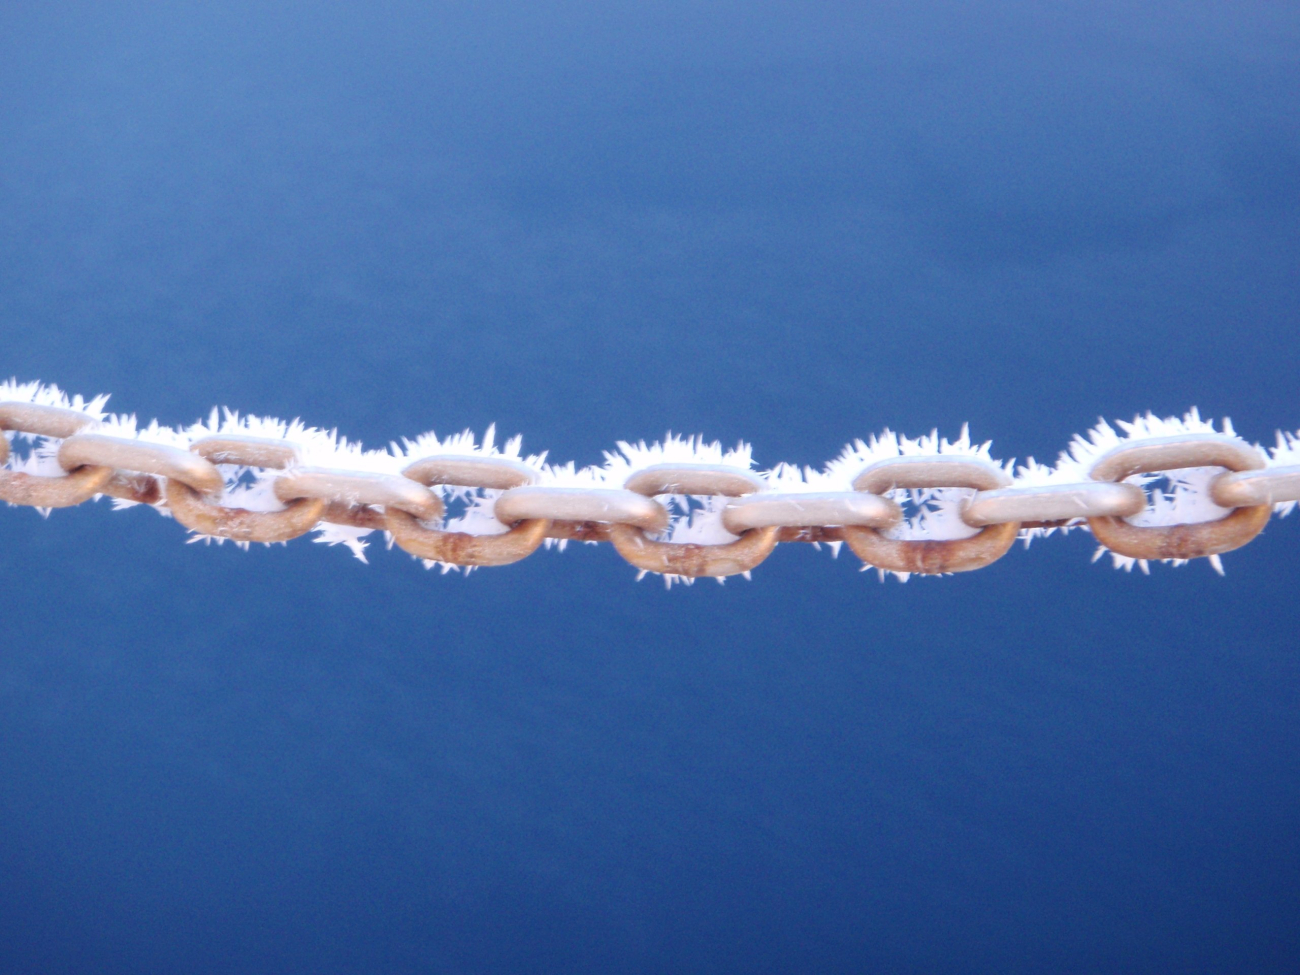 Rime ice on chain and metallic surfaces